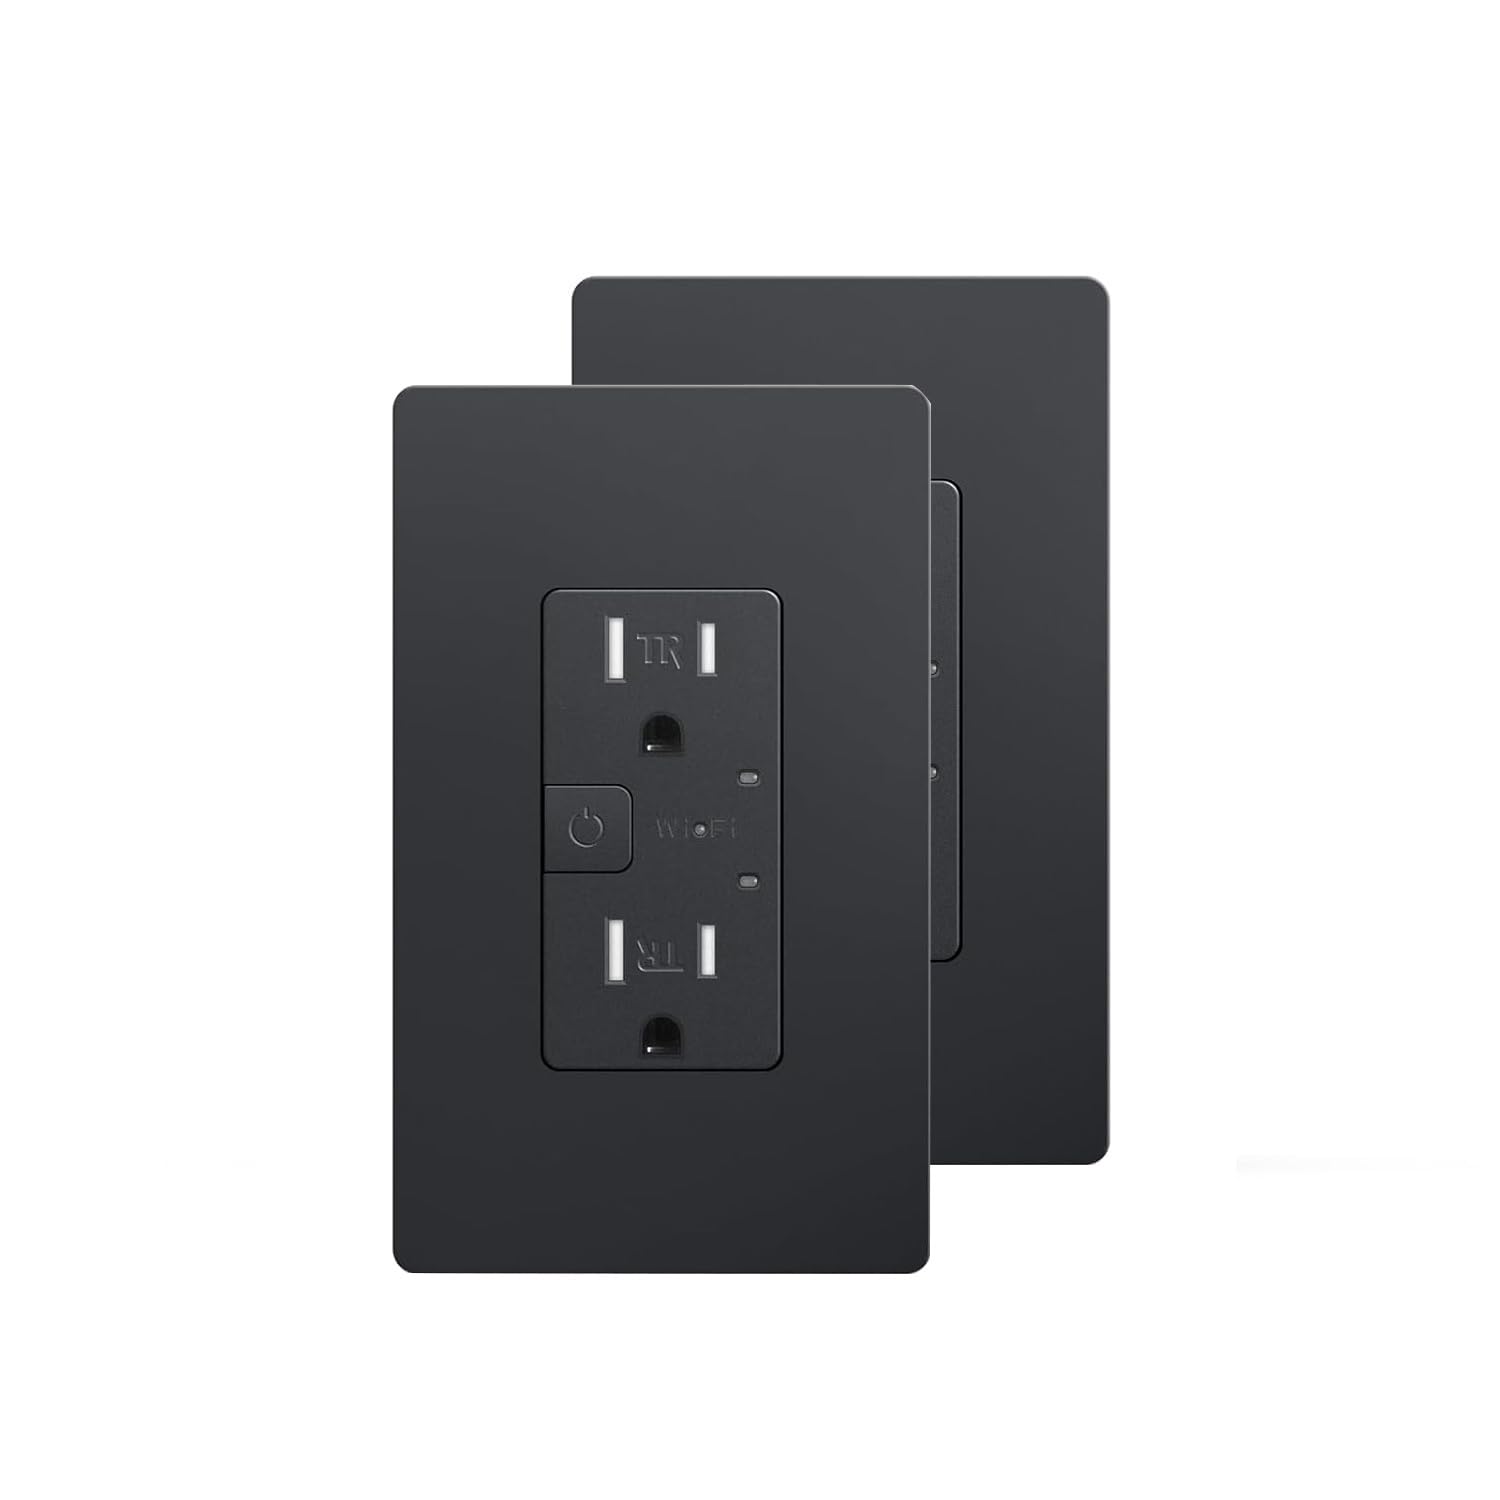 JUNLIT Smart Outlet, Tamper Resistant Outlet Compatible with Alexa and Google Assistant, Remote Control, ETL & FCC Approvel Samrt Receptacle, Requires 2.4 GHz Wi-Fi, No Hub Required, Black